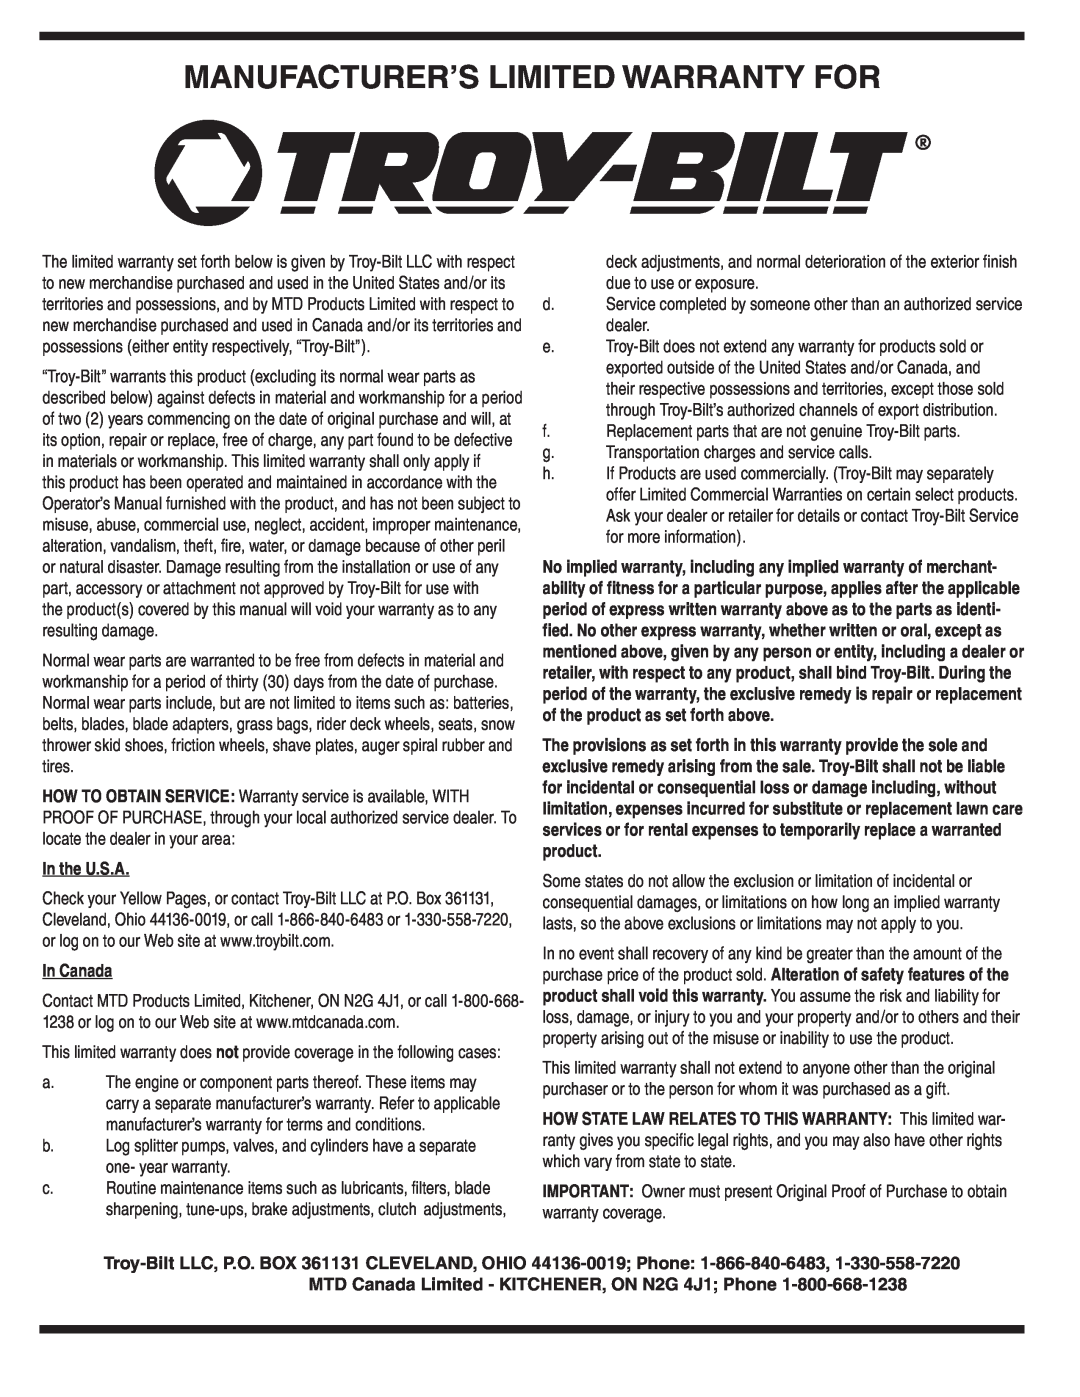 Troy-Bilt 24A-070F768 warranty Manufacturer’S Limited Warranty For, In the U.S.A, In Canada 